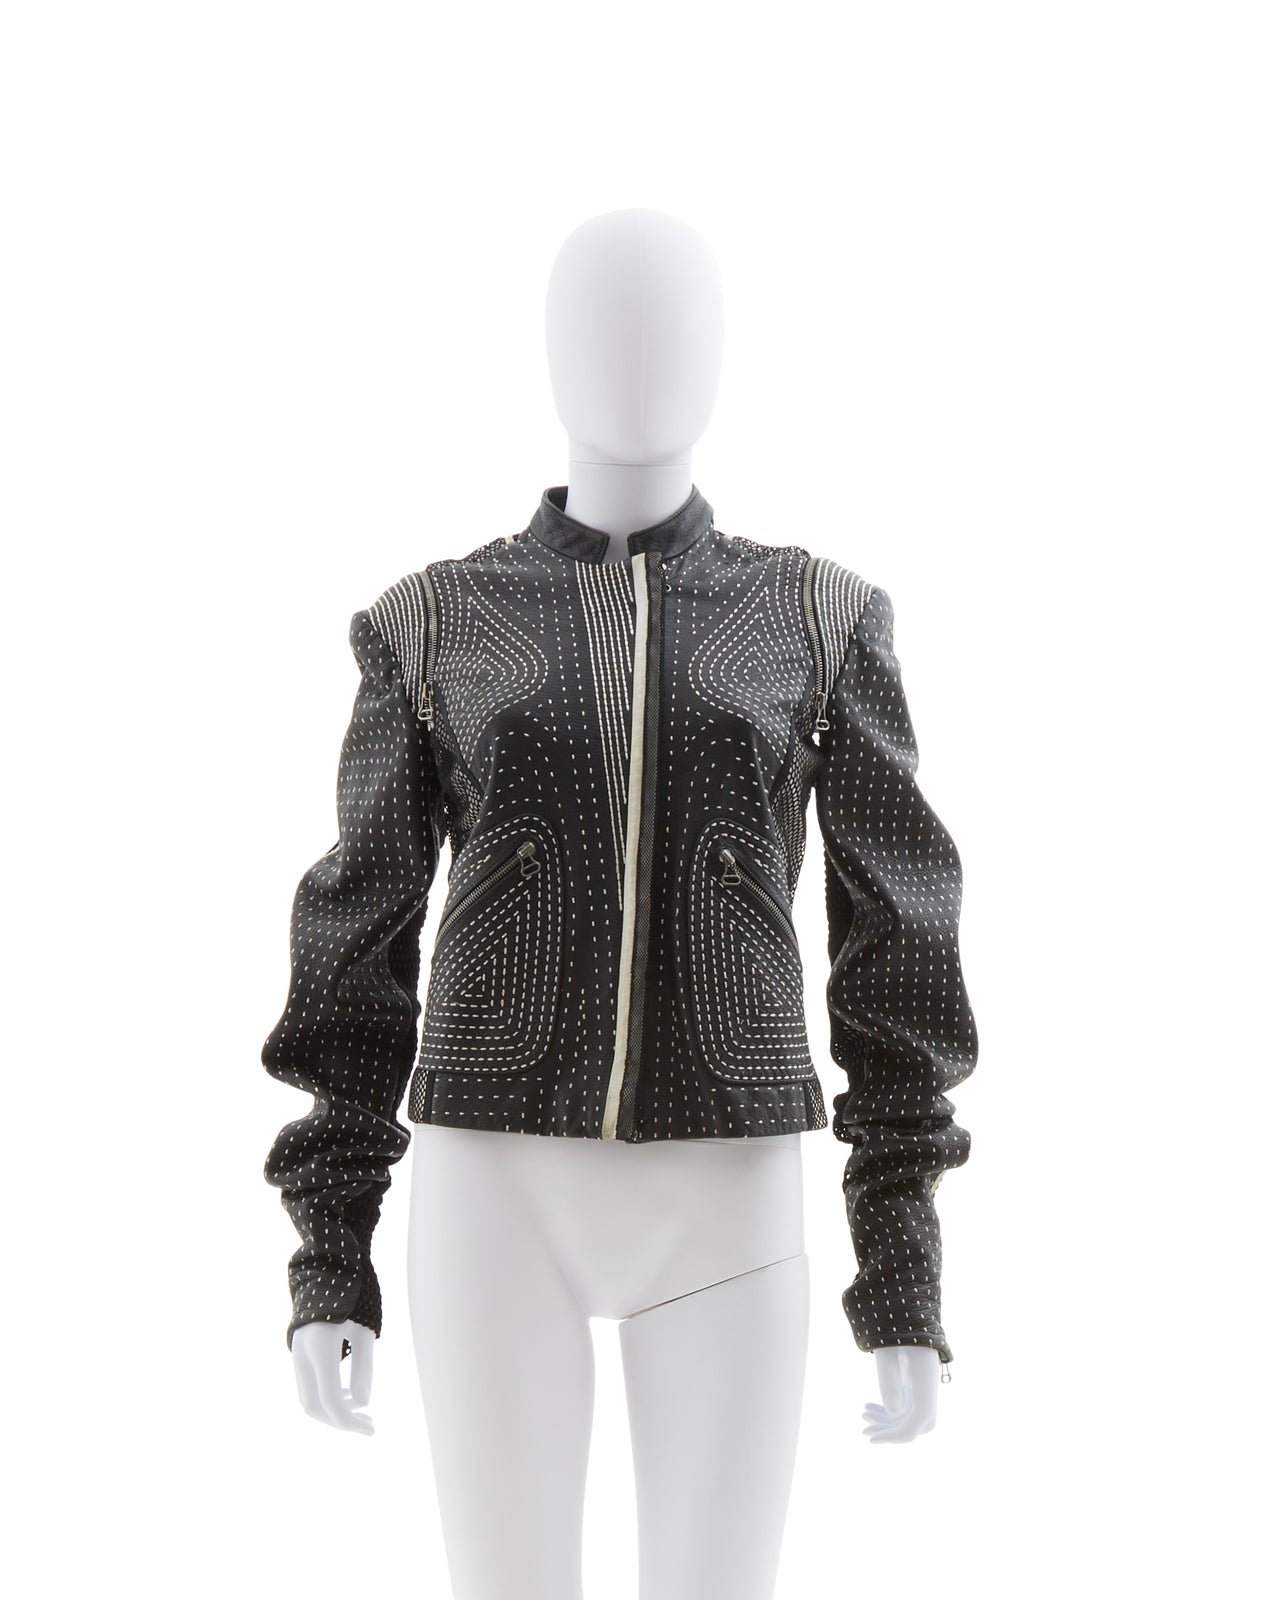 Gianfranco Ferrè S/S 2004 Black back netted motorcycle leather jacket